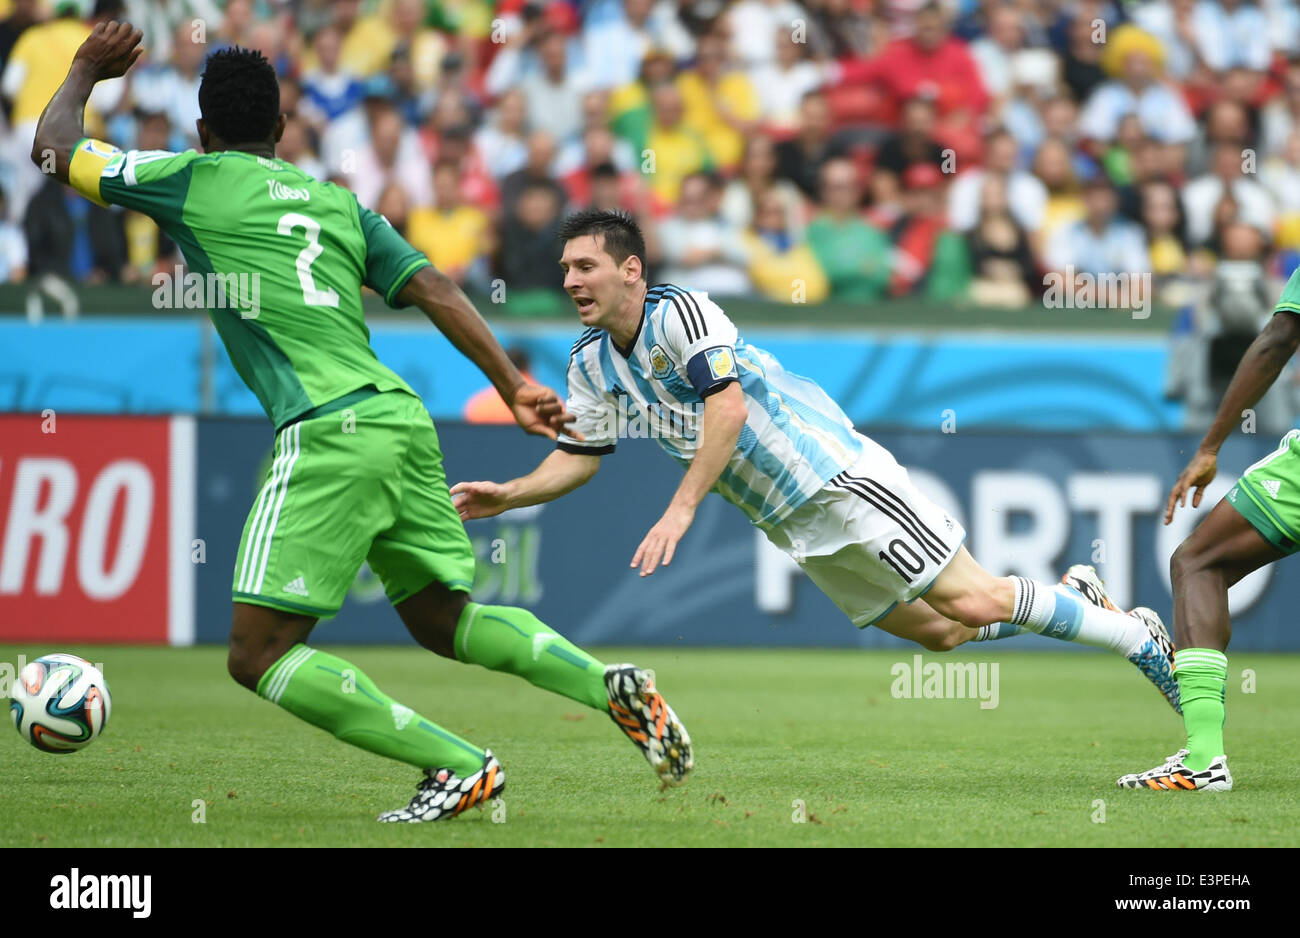 Porto Alegre, Brazil. 25th June, 2014. Argentina's Lionel Messi (C) strives for the ball during a Group F match between Nigeria and Argentina of 2014 FIFA World Cup at the Estadio Beira-Rio Stadium in Porto Alegre, Brazil, on June 25, 2014. © Li Ga/Xinhua/Alamy Live News Stock Photo